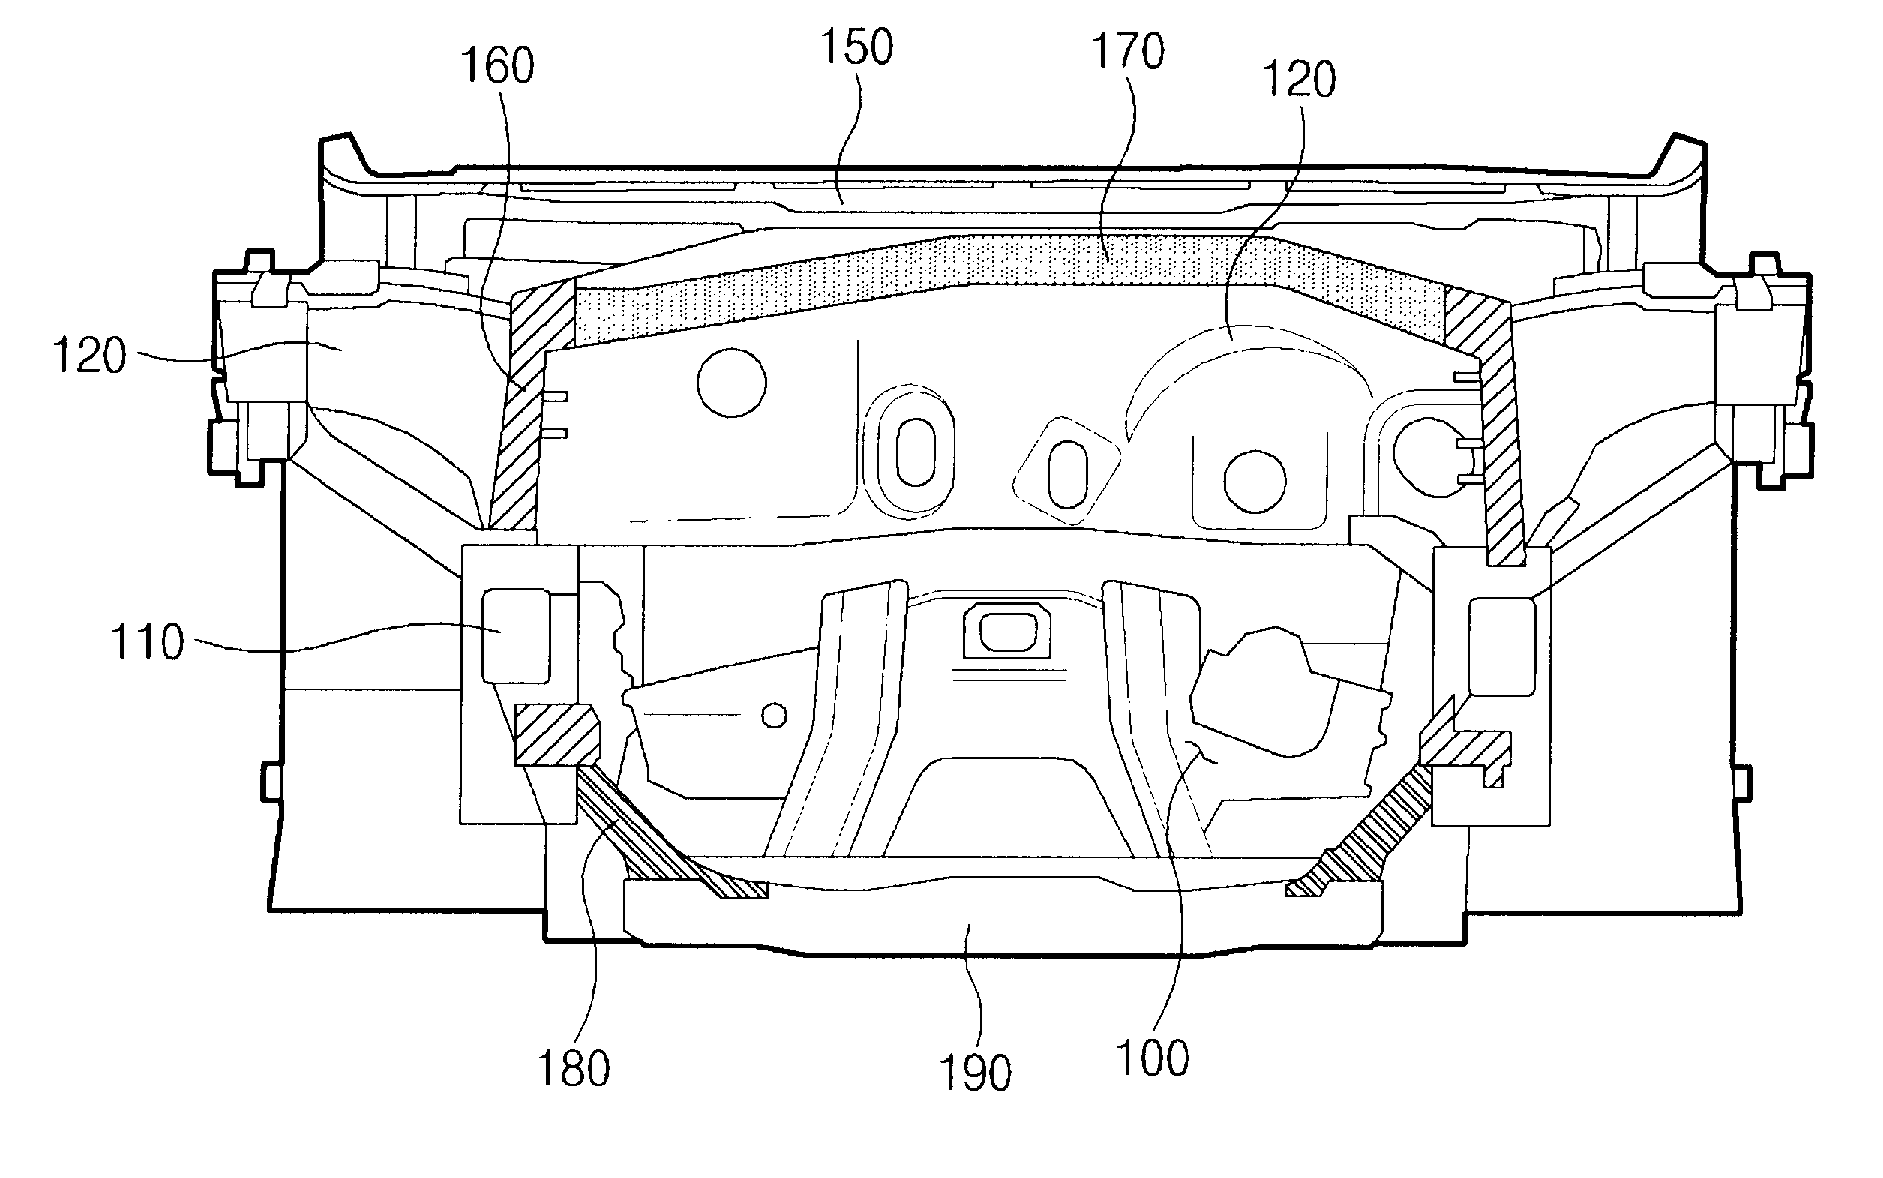 Mounting structure of front body frame in vehicle